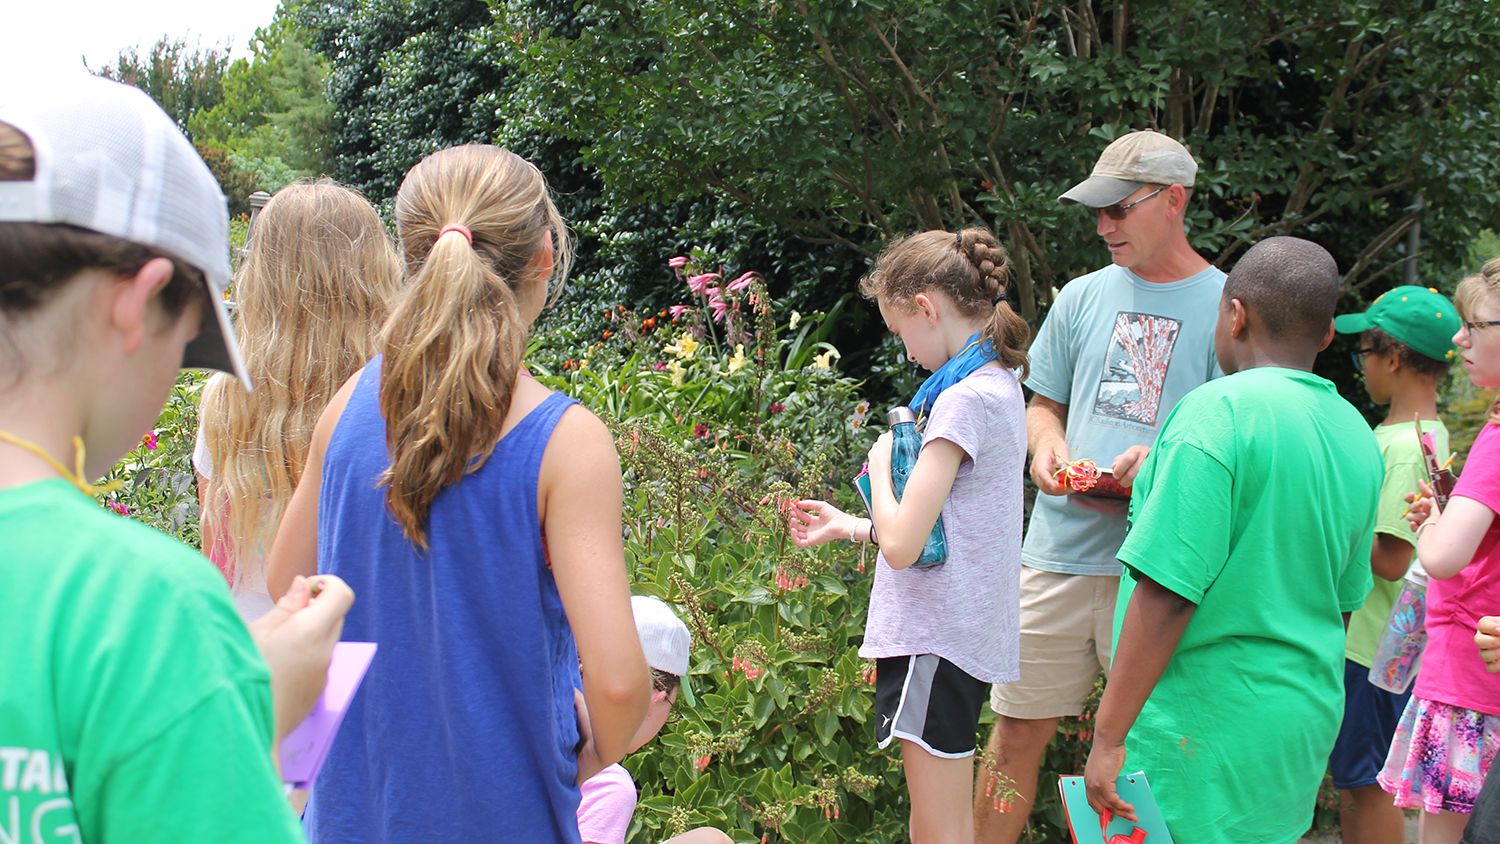 Middle school students examine pollinating plants.